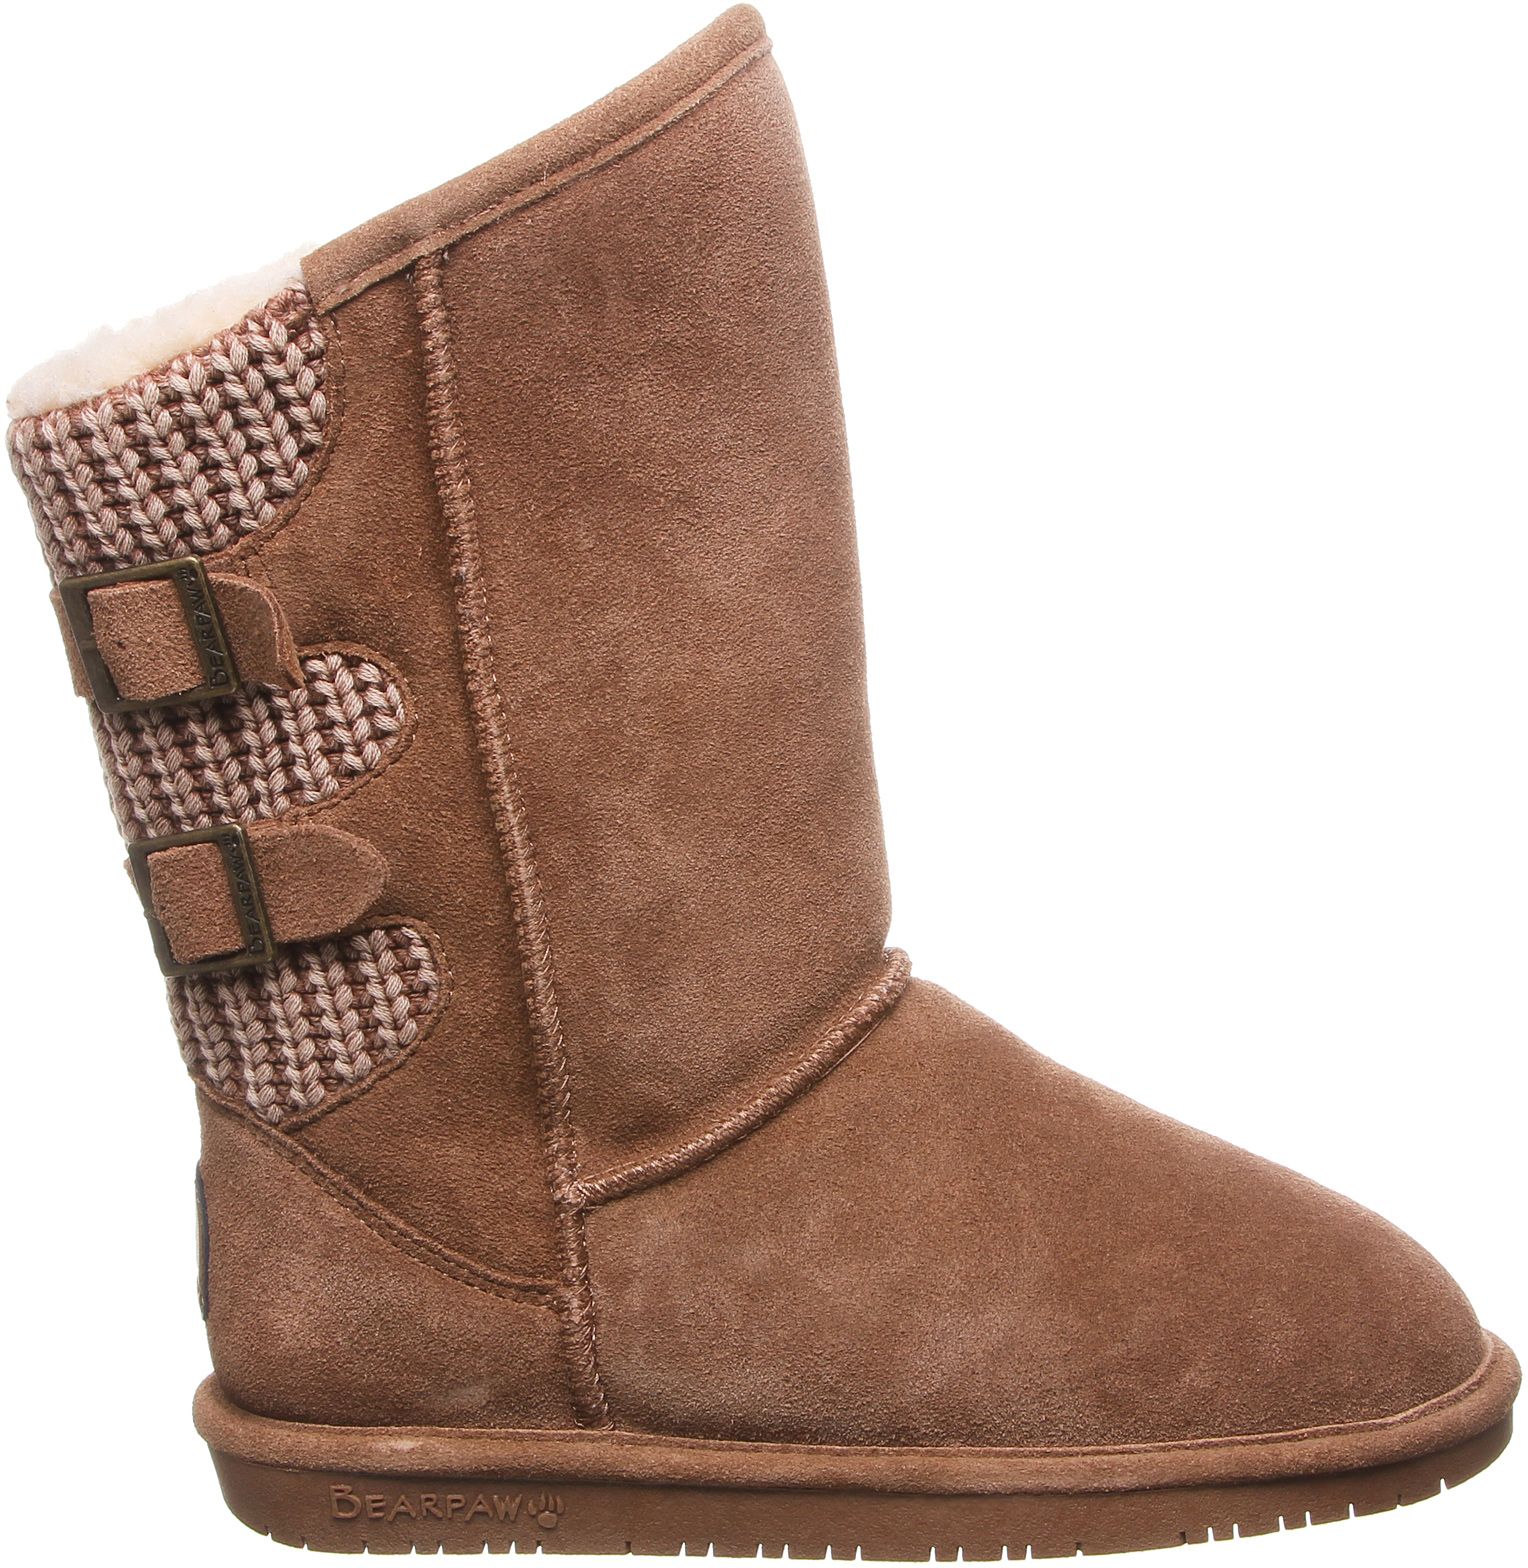 women's bearpaw boots with bows